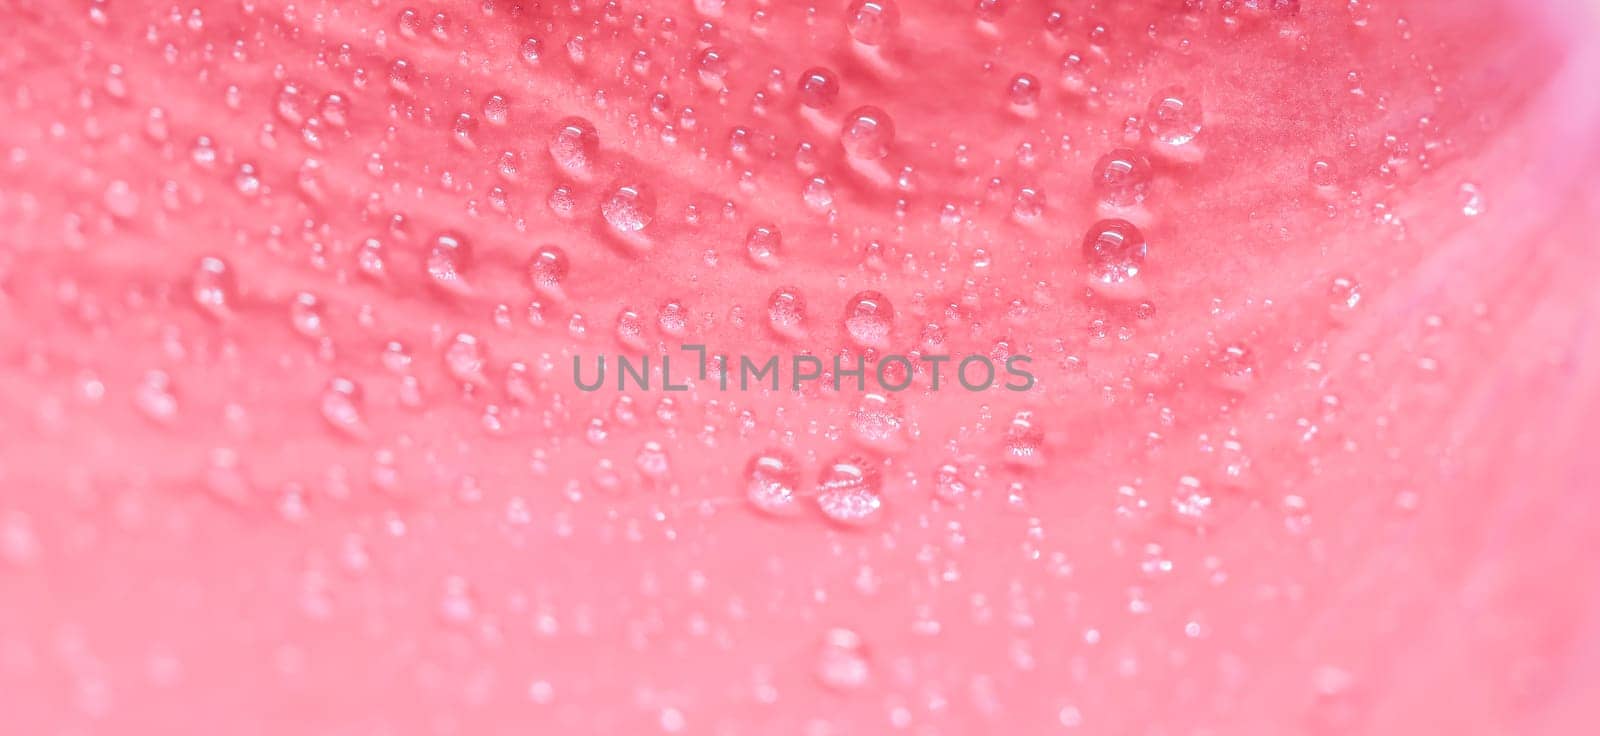 Background of pink rose petals with dew drops. Bokeh with light reflection. Macro blurred natural backdrop. Soft focus